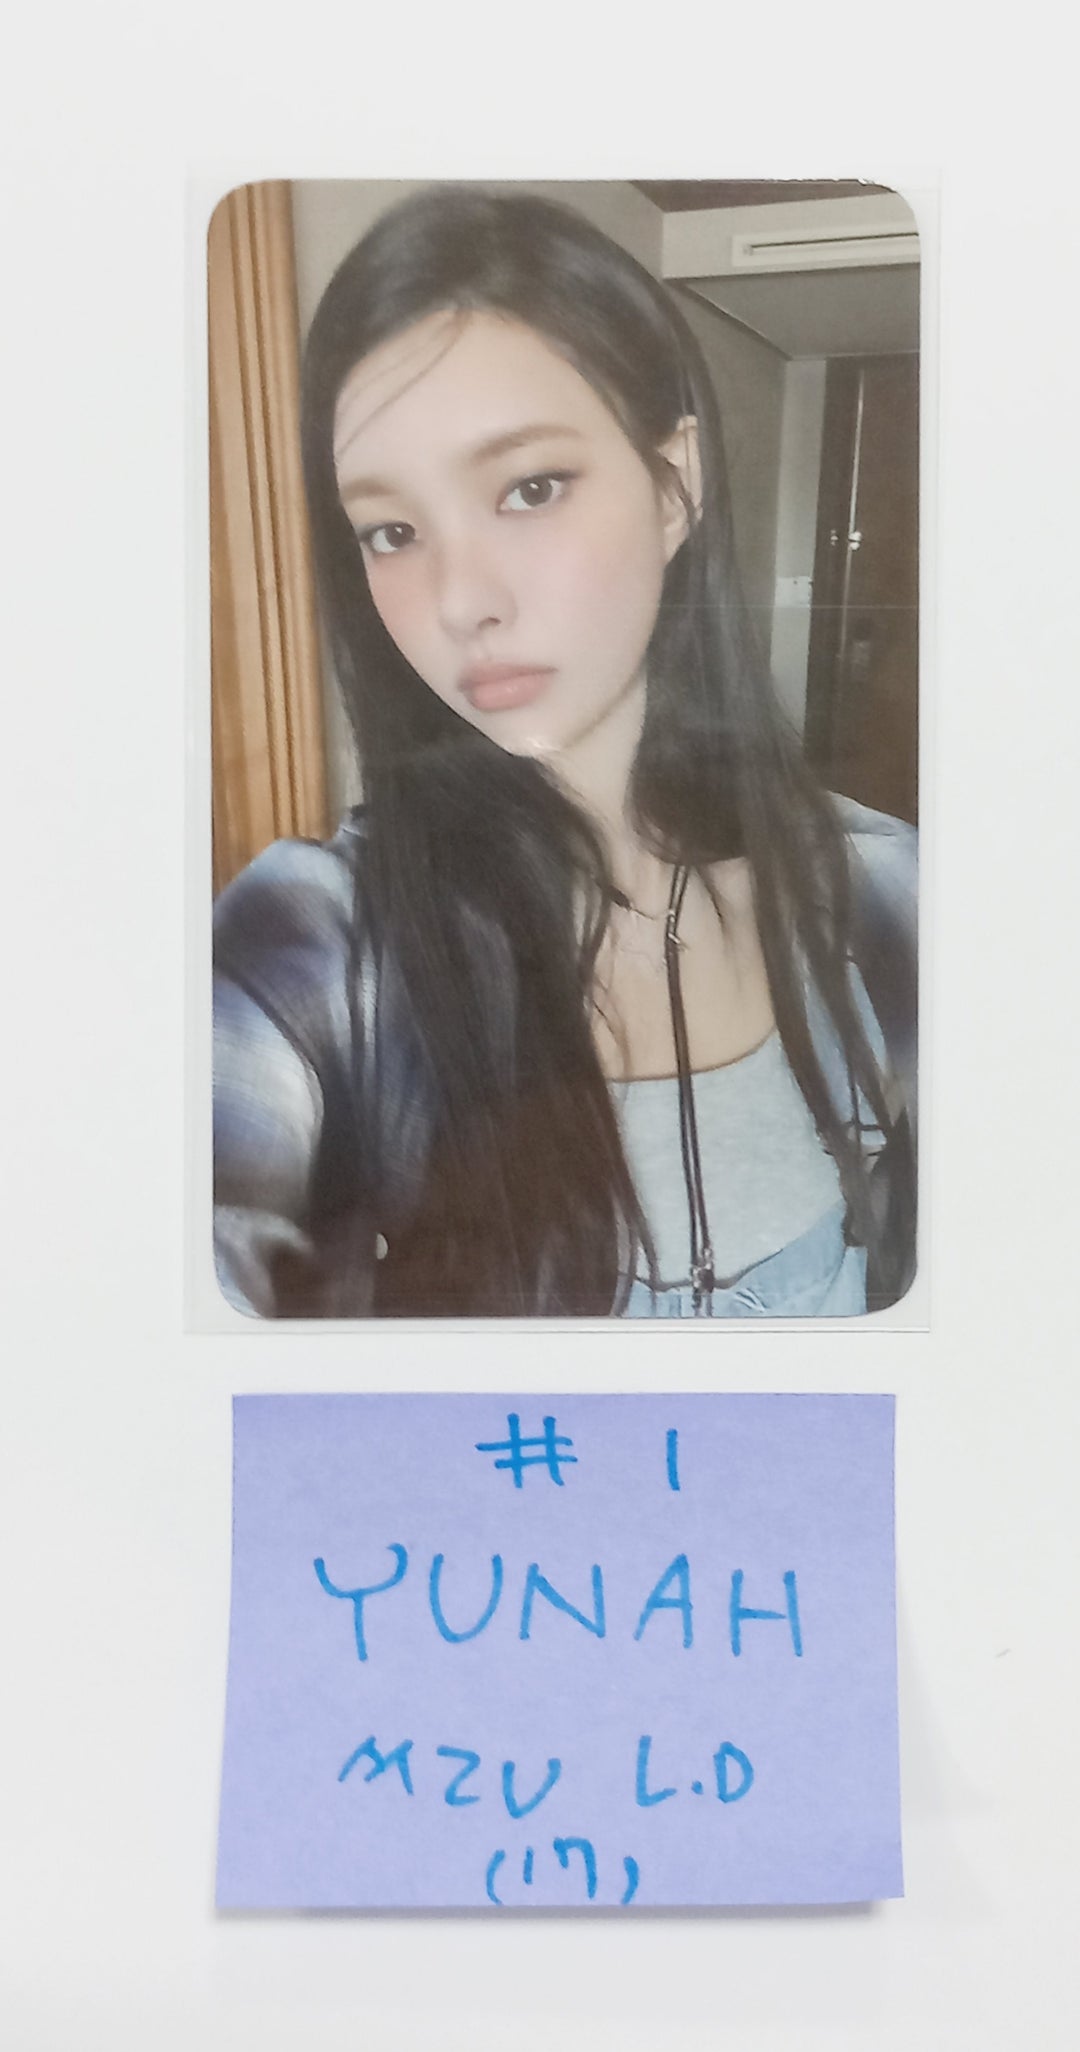 ILLIT "SUPER REAL ME" - M2U Luckydraw Event Photocard Round 2 [24.4.12]